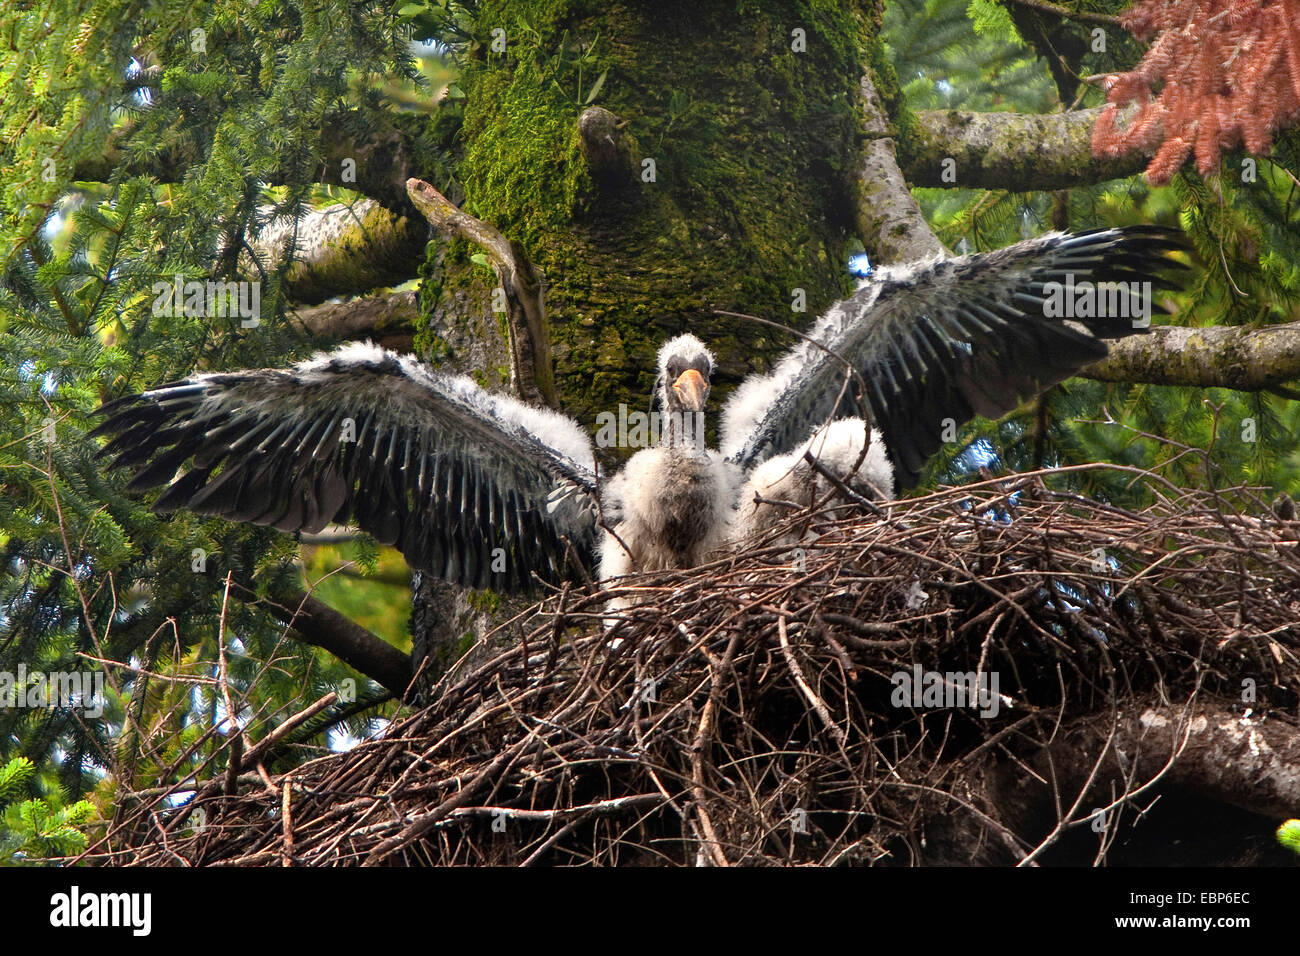 black stork (Ciconia nigra), young bird with down plumage spreading its wings in the nest in an old fir, Germany, Bavaria, Oberbayern, Upper Bavaria Stock Photo